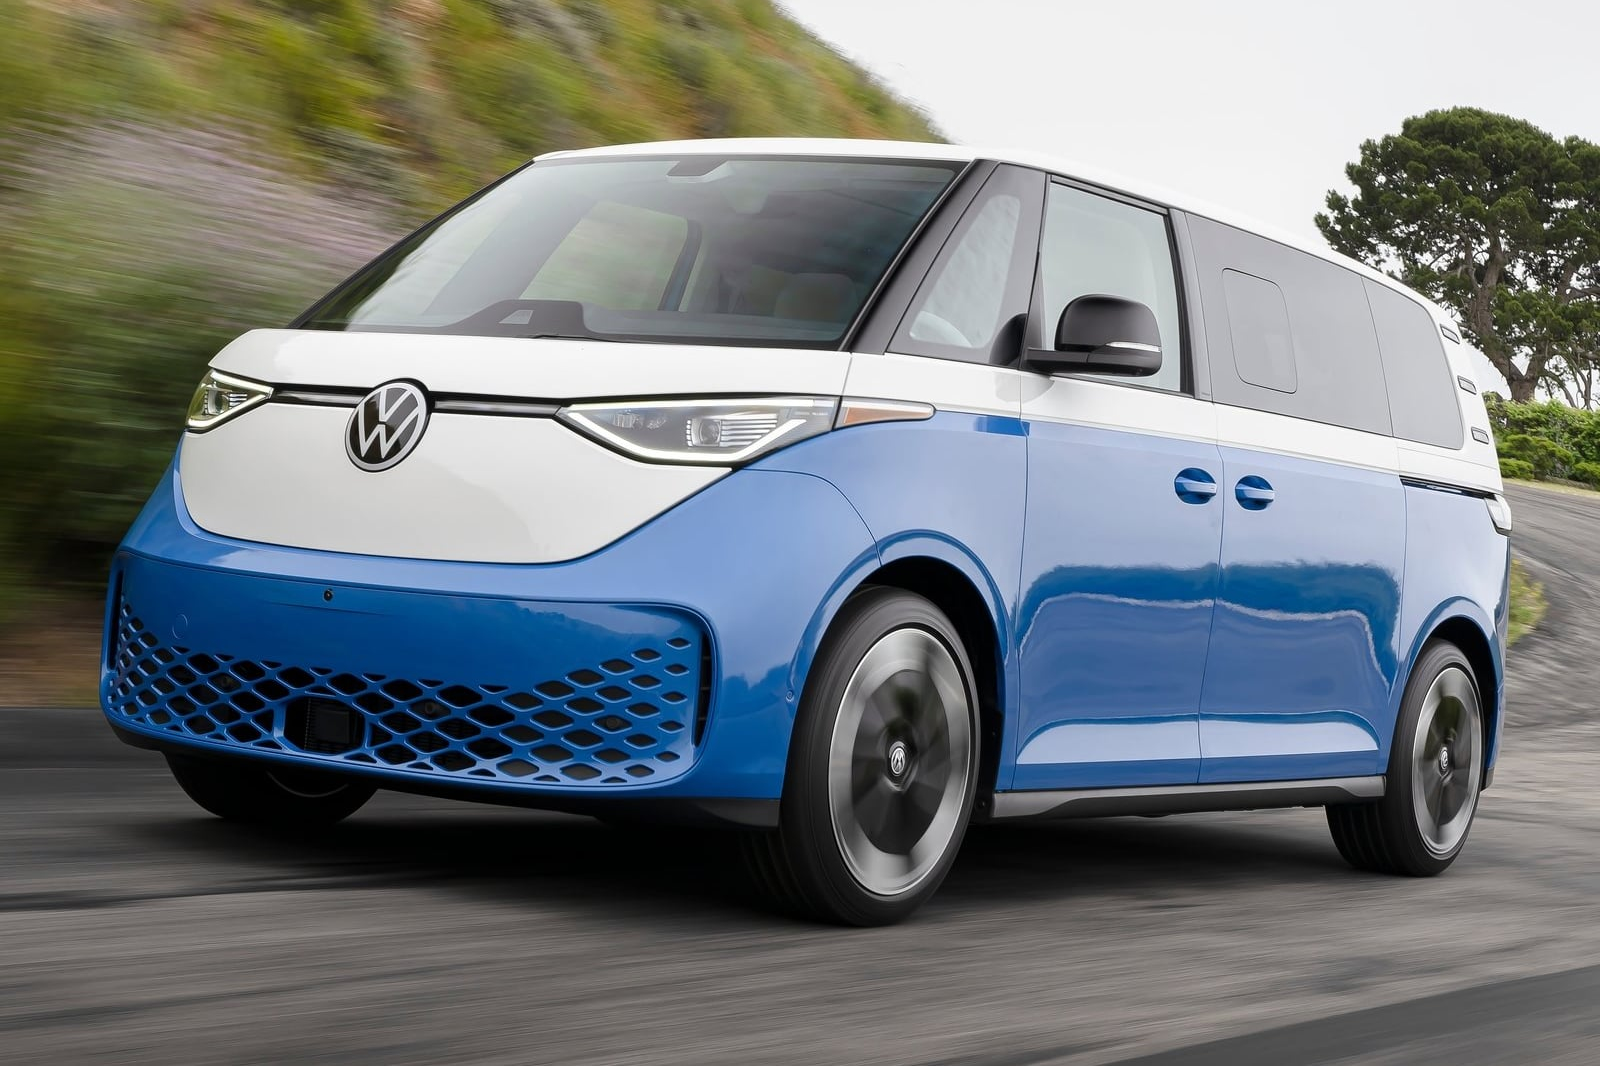 technology, why vw's ev composites will succeed where bmw's failed